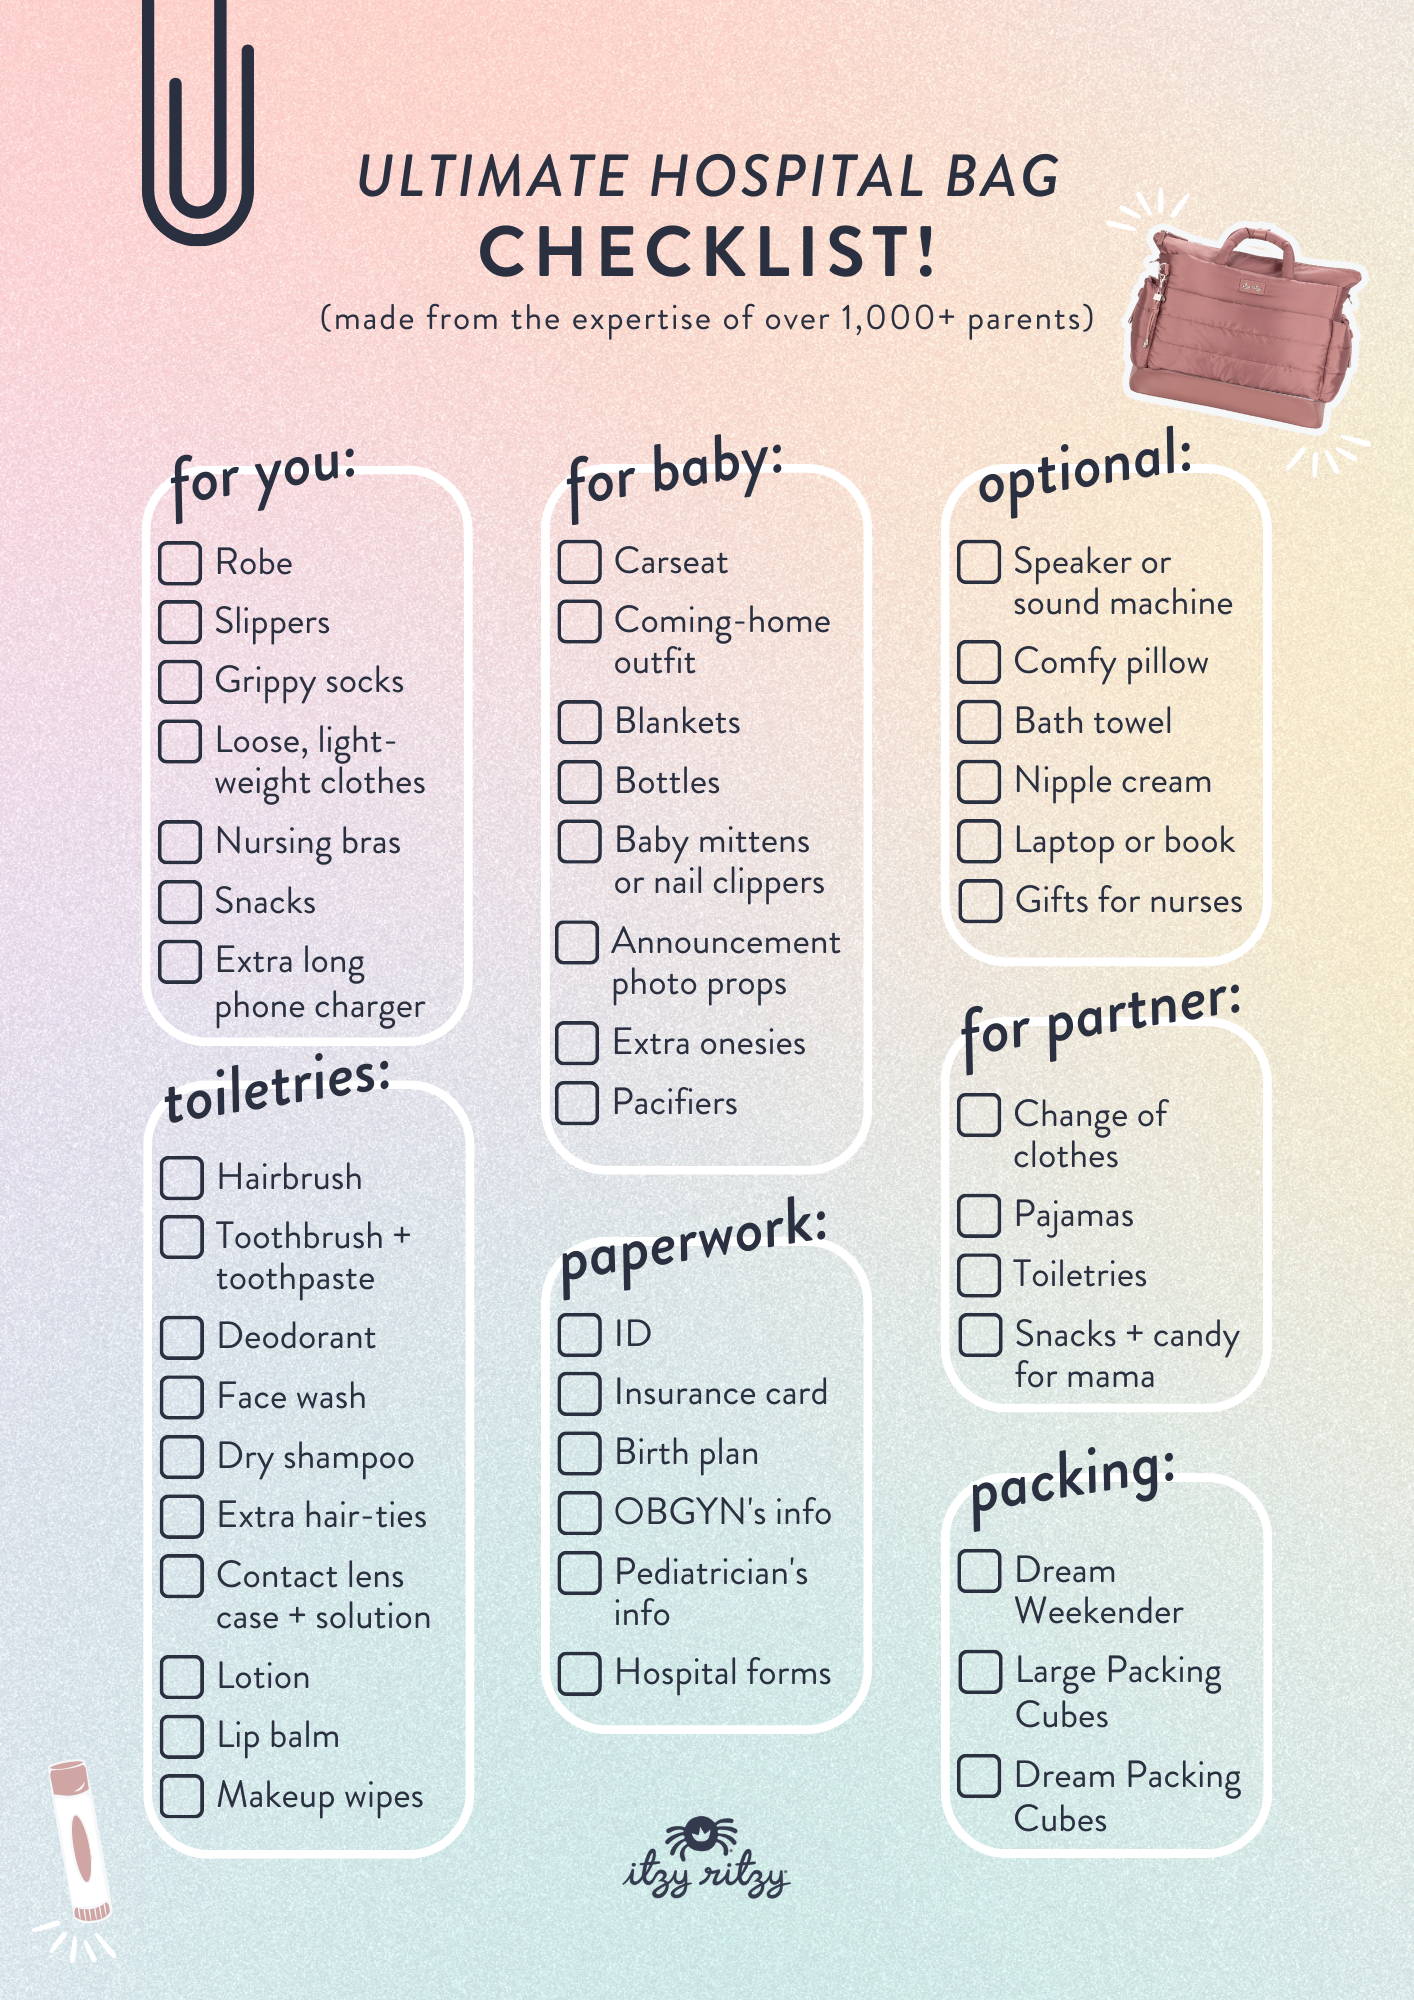 Maternity Hospital Bag Checklist: What To Pack For Mom & Baby For